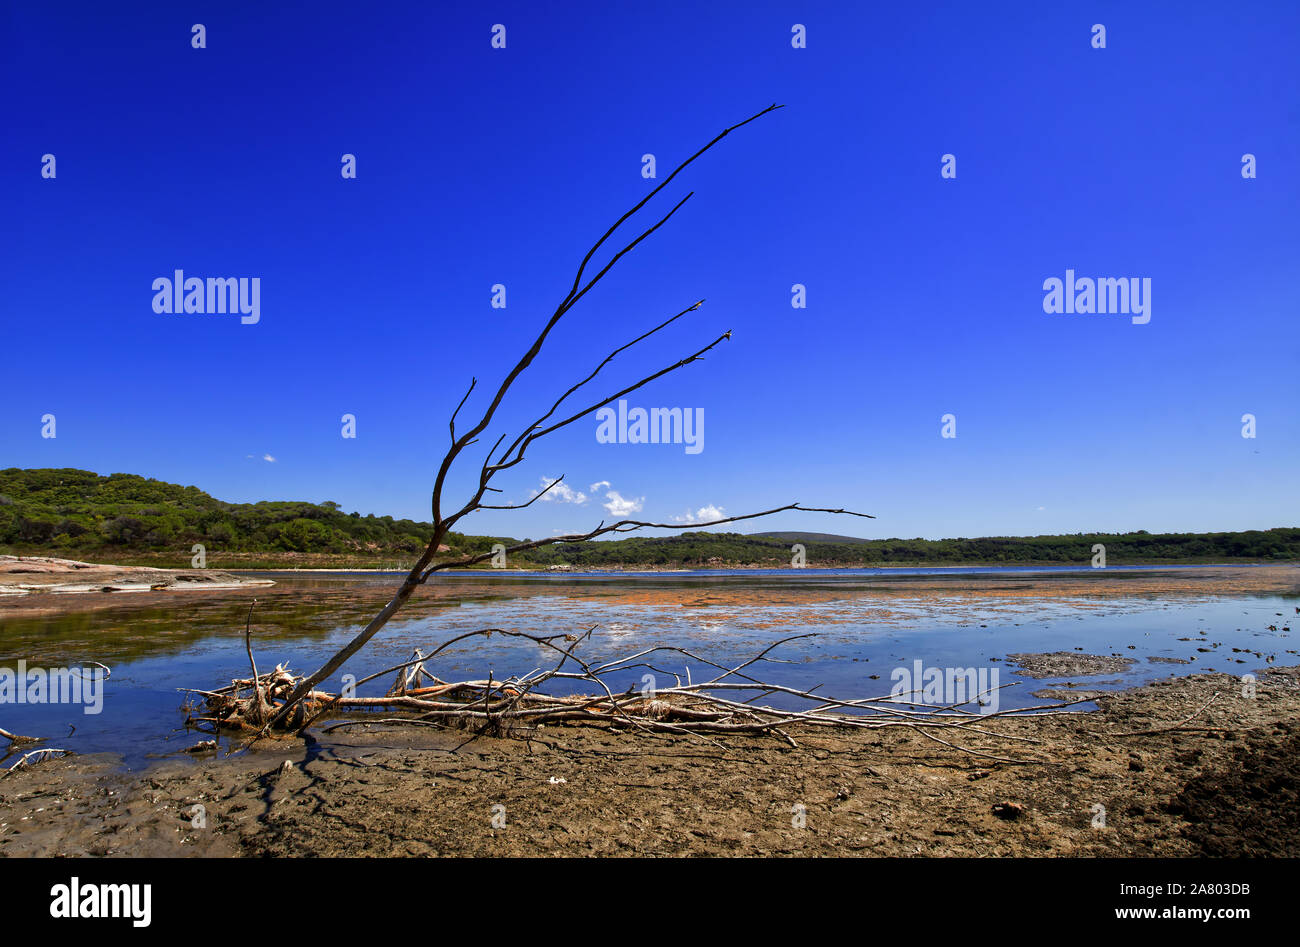 Lake Baratz (Lago di Baratz), the only natural freshwater lake in Sardinia. Lake with reflections, blu sky and a dried branch. Stock Photo